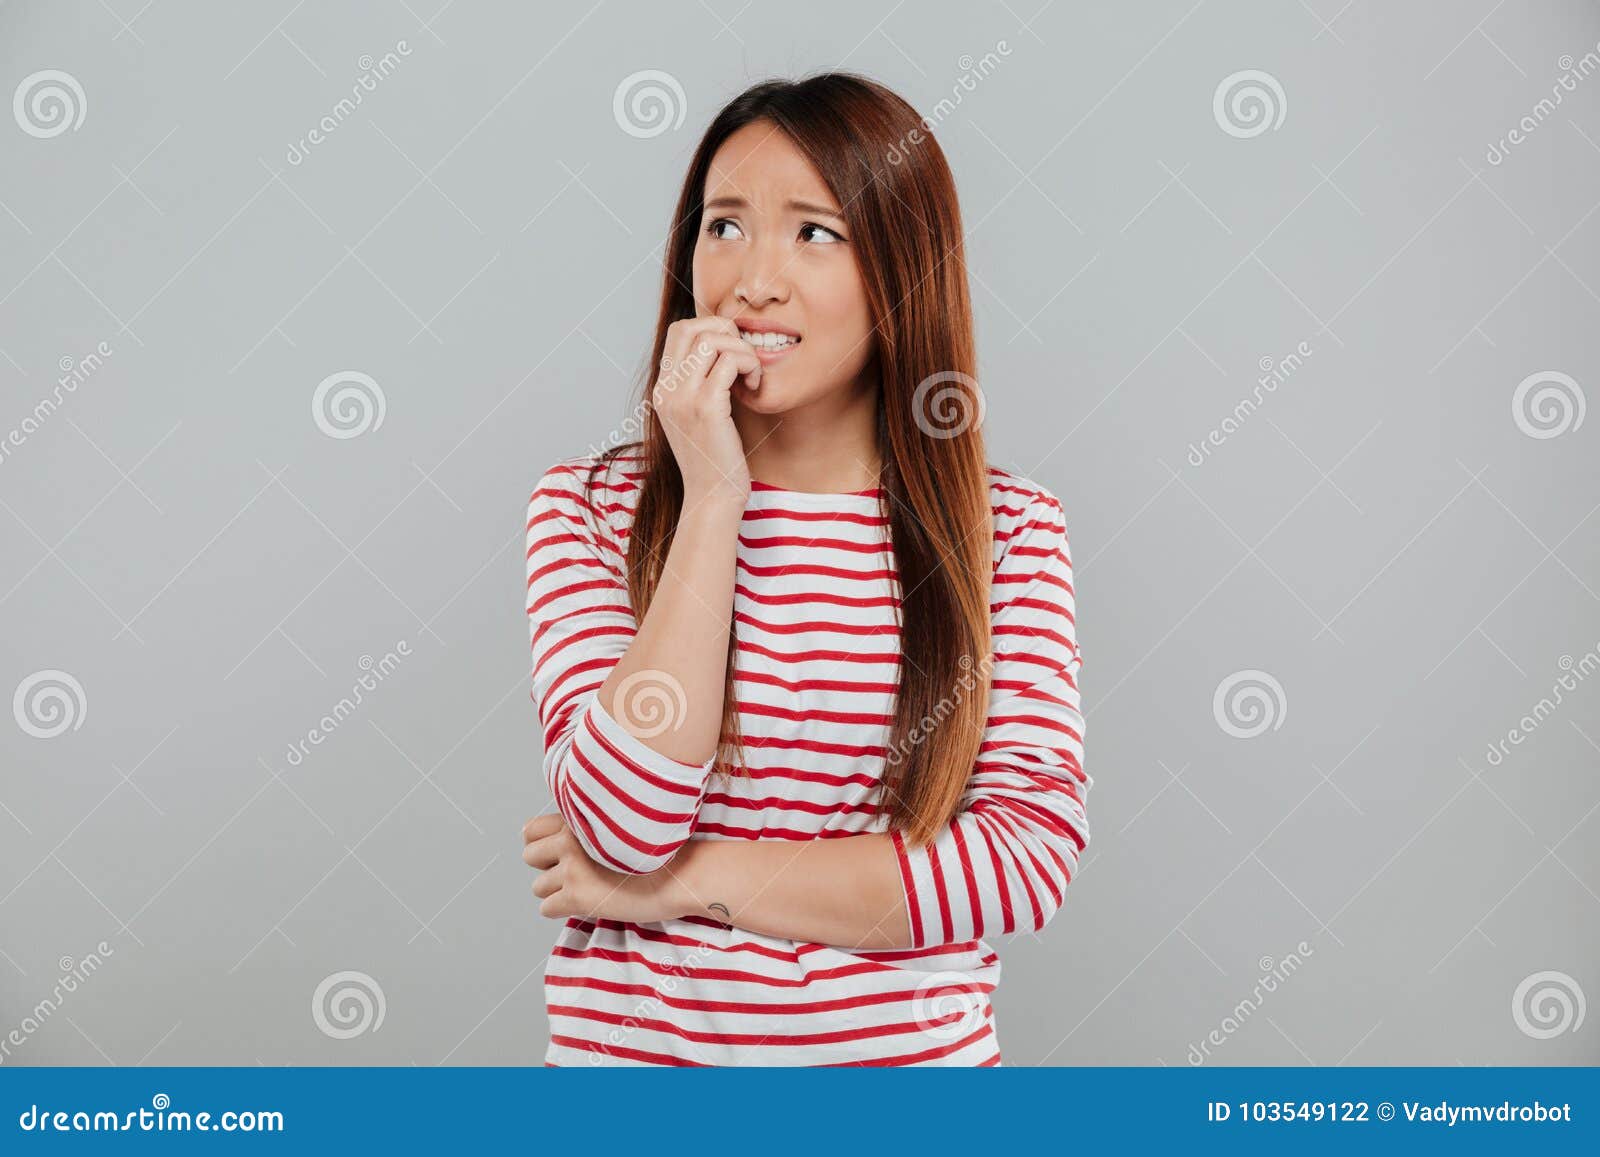 511 Girl Biting Her Nails Stock Photos - Free & Royalty-Free Stock Photos  from Dreamstime